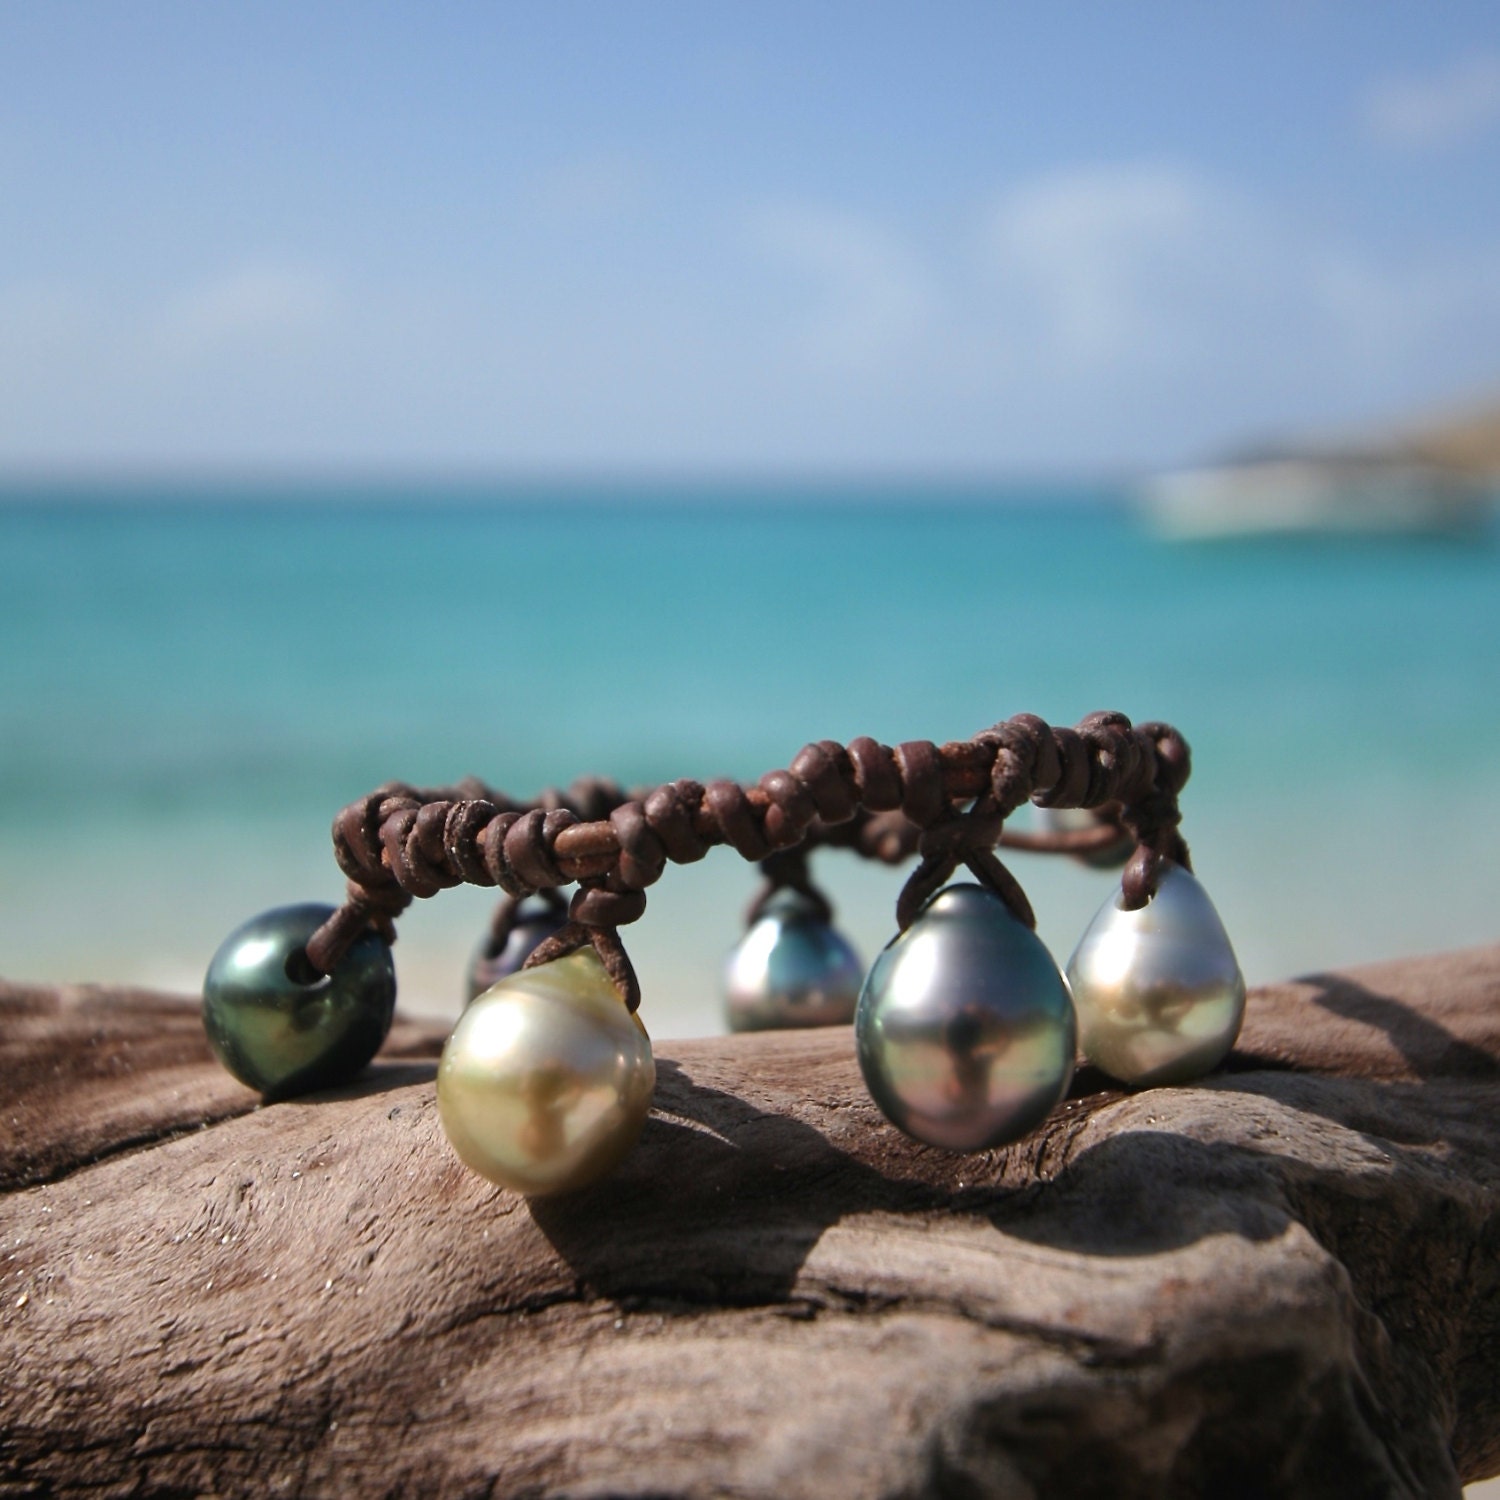 Seven pure 24k gold beads on leather with a Tahitian pearls clasp, beach  jewelry, bohochic, St Barth island, handmade leather chic jewelry.